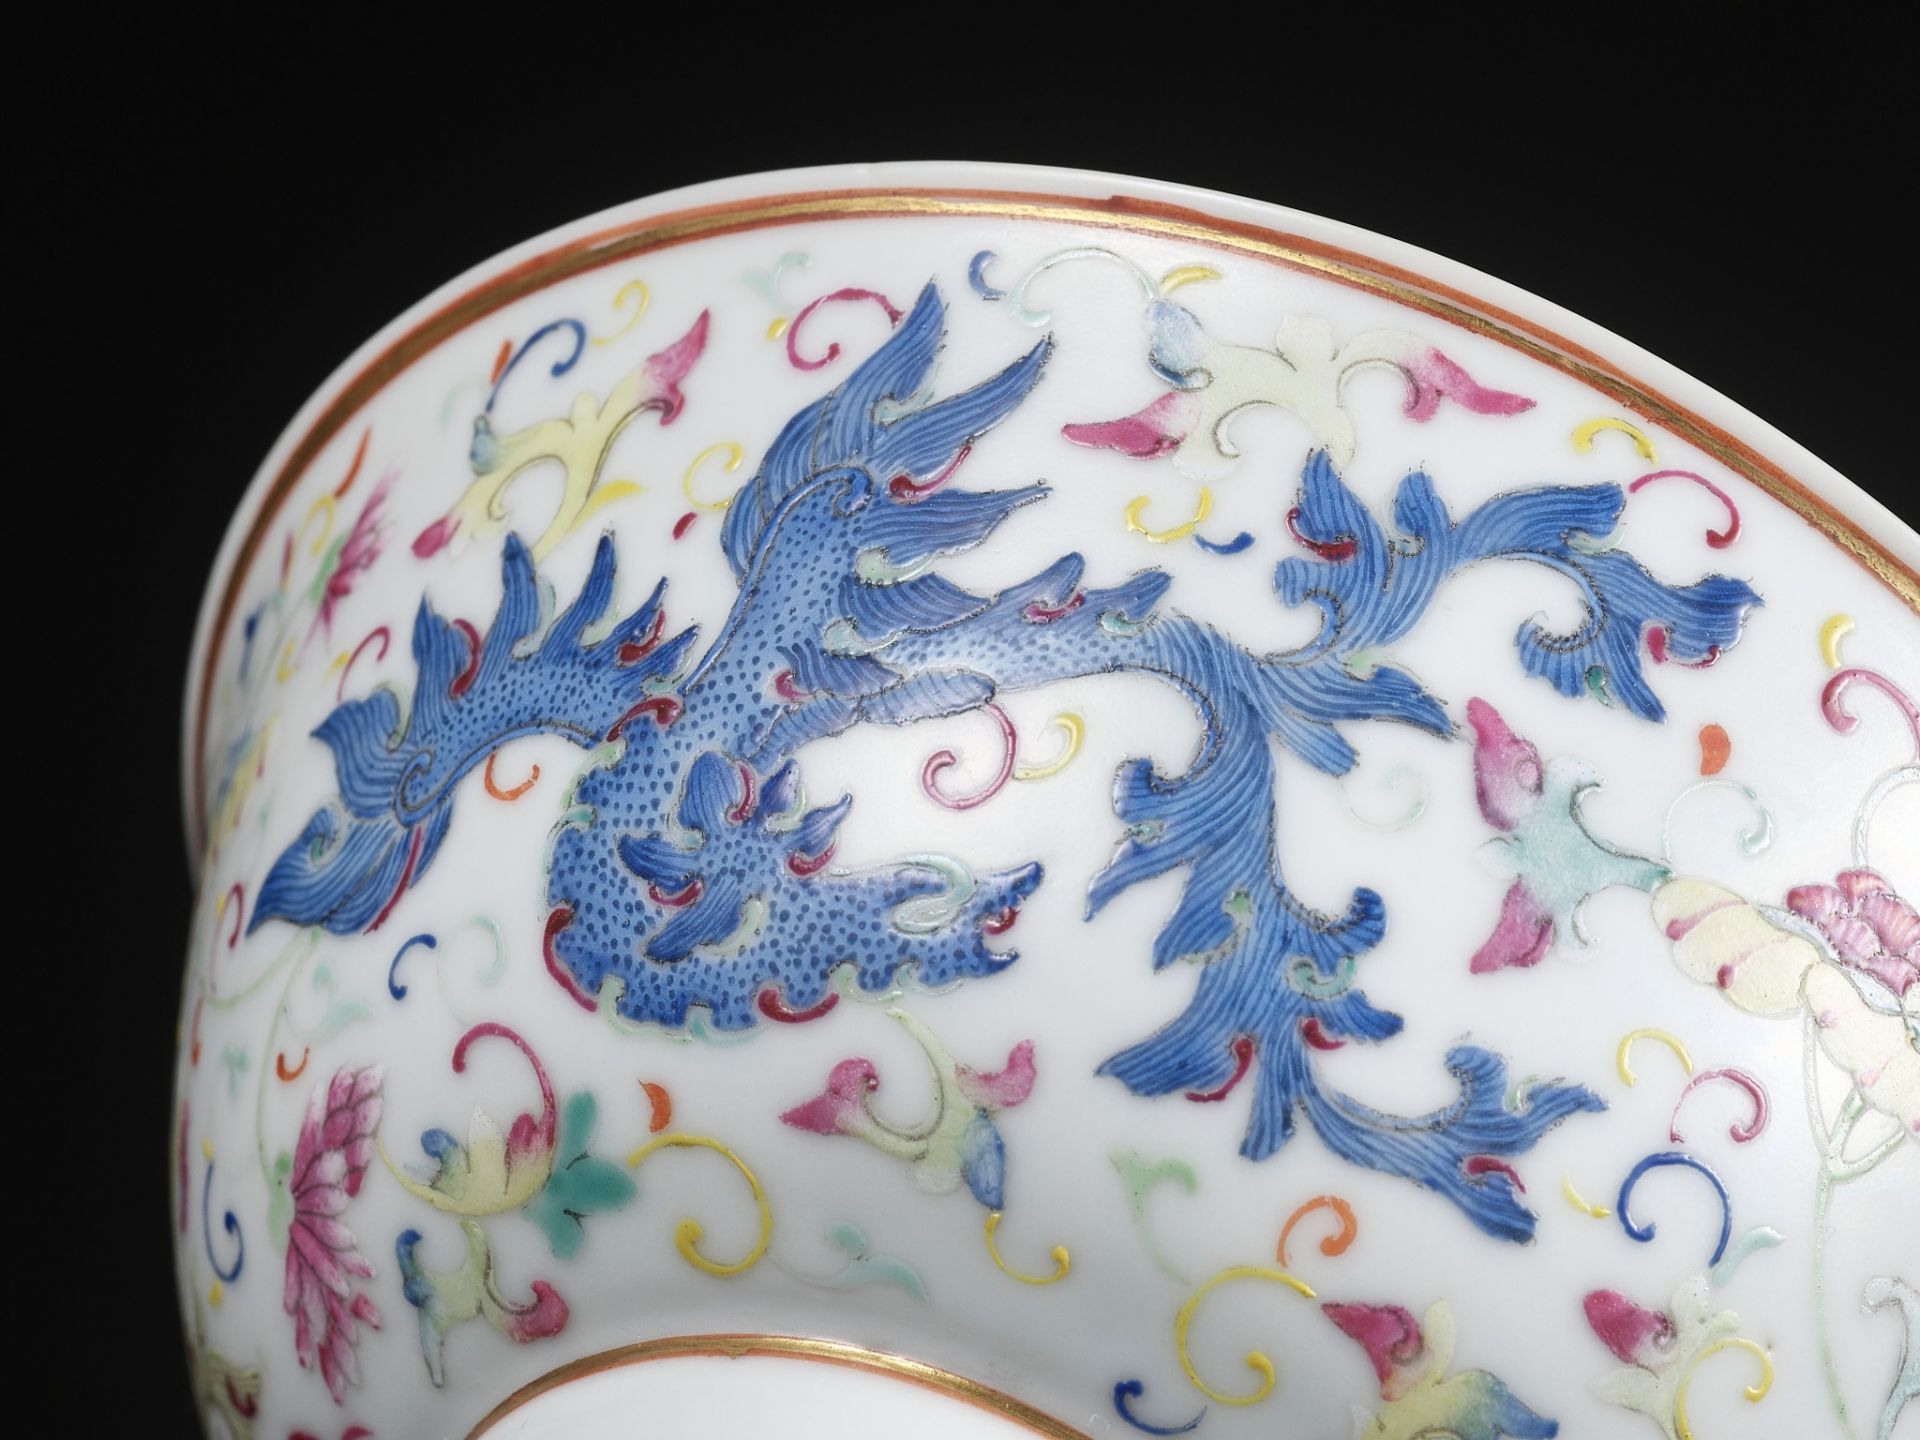 A PAIR OF FAMILLE-ROSE 'PHOENIX' BOWLS, GUANGXU MARK AND PERIOD - Image 15 of 16